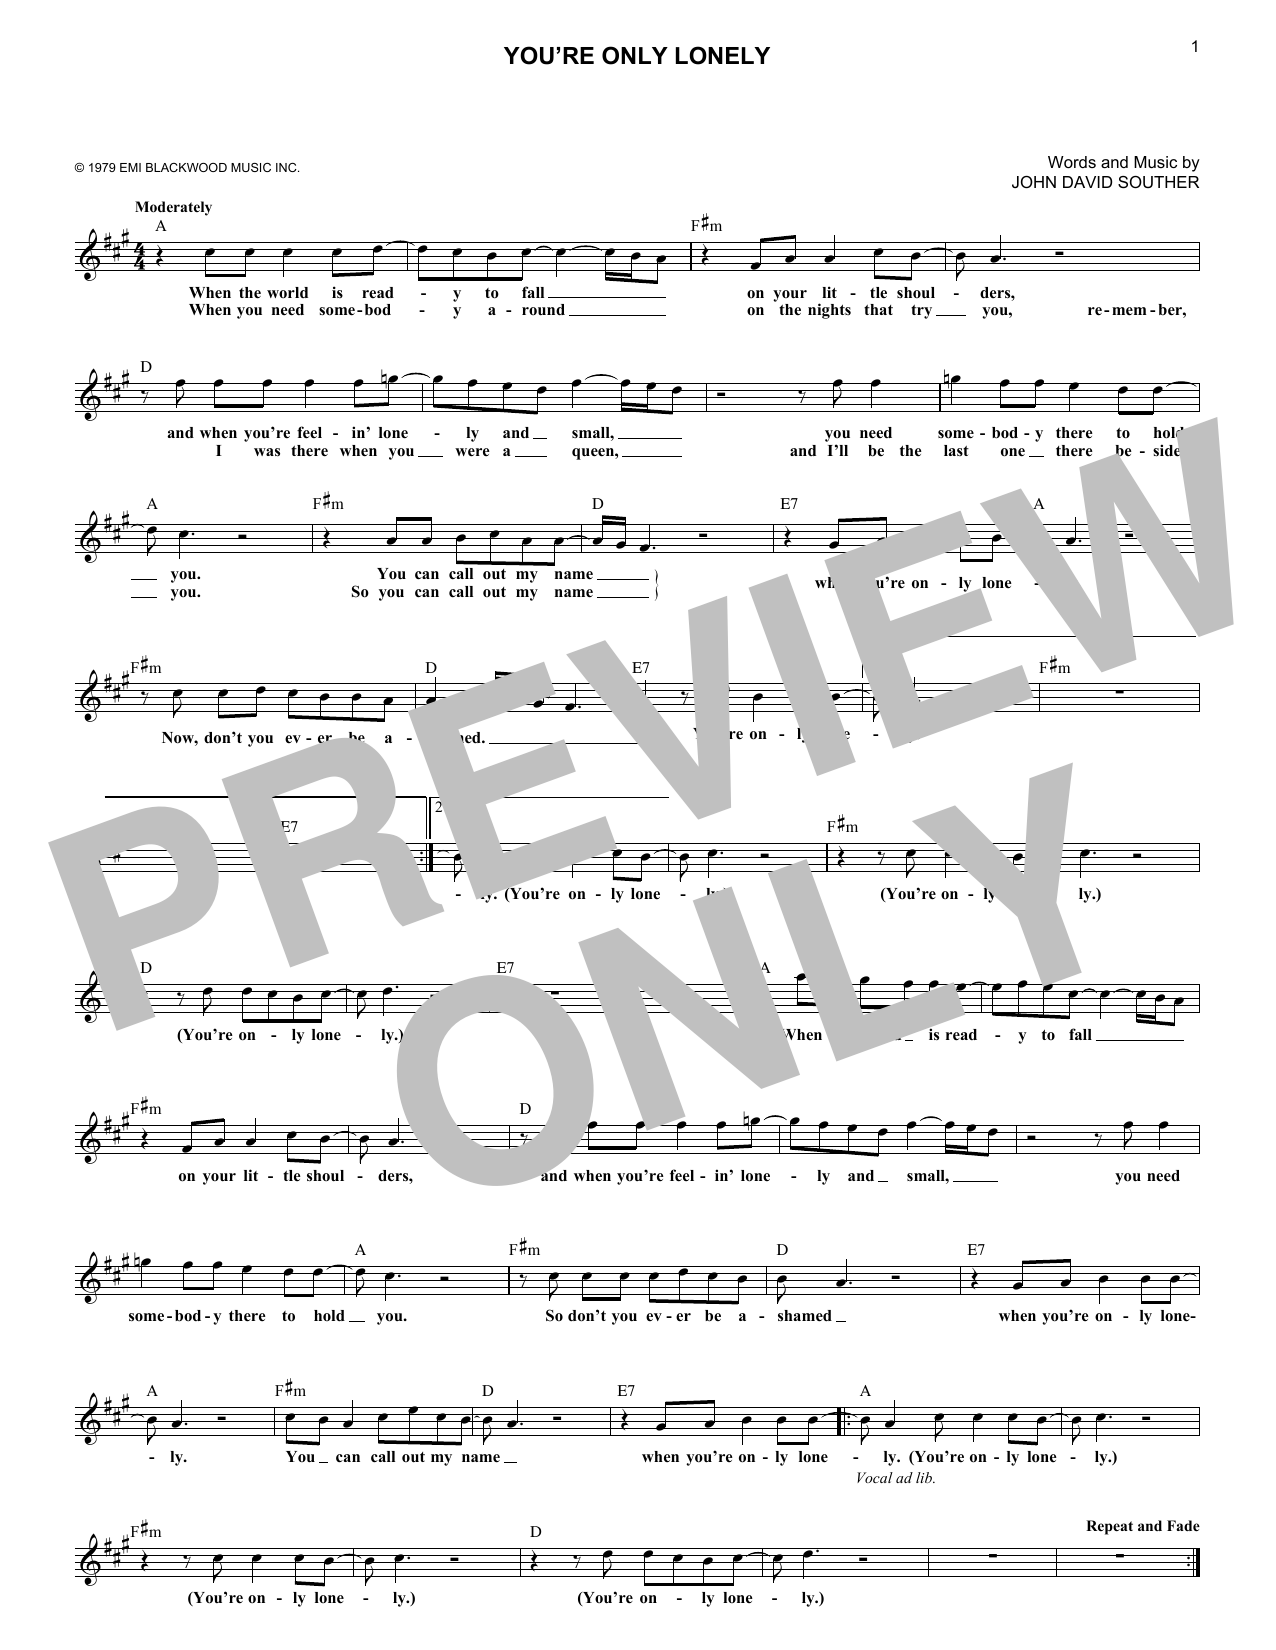 Download J.D. Souther You're Only Lonely Sheet Music